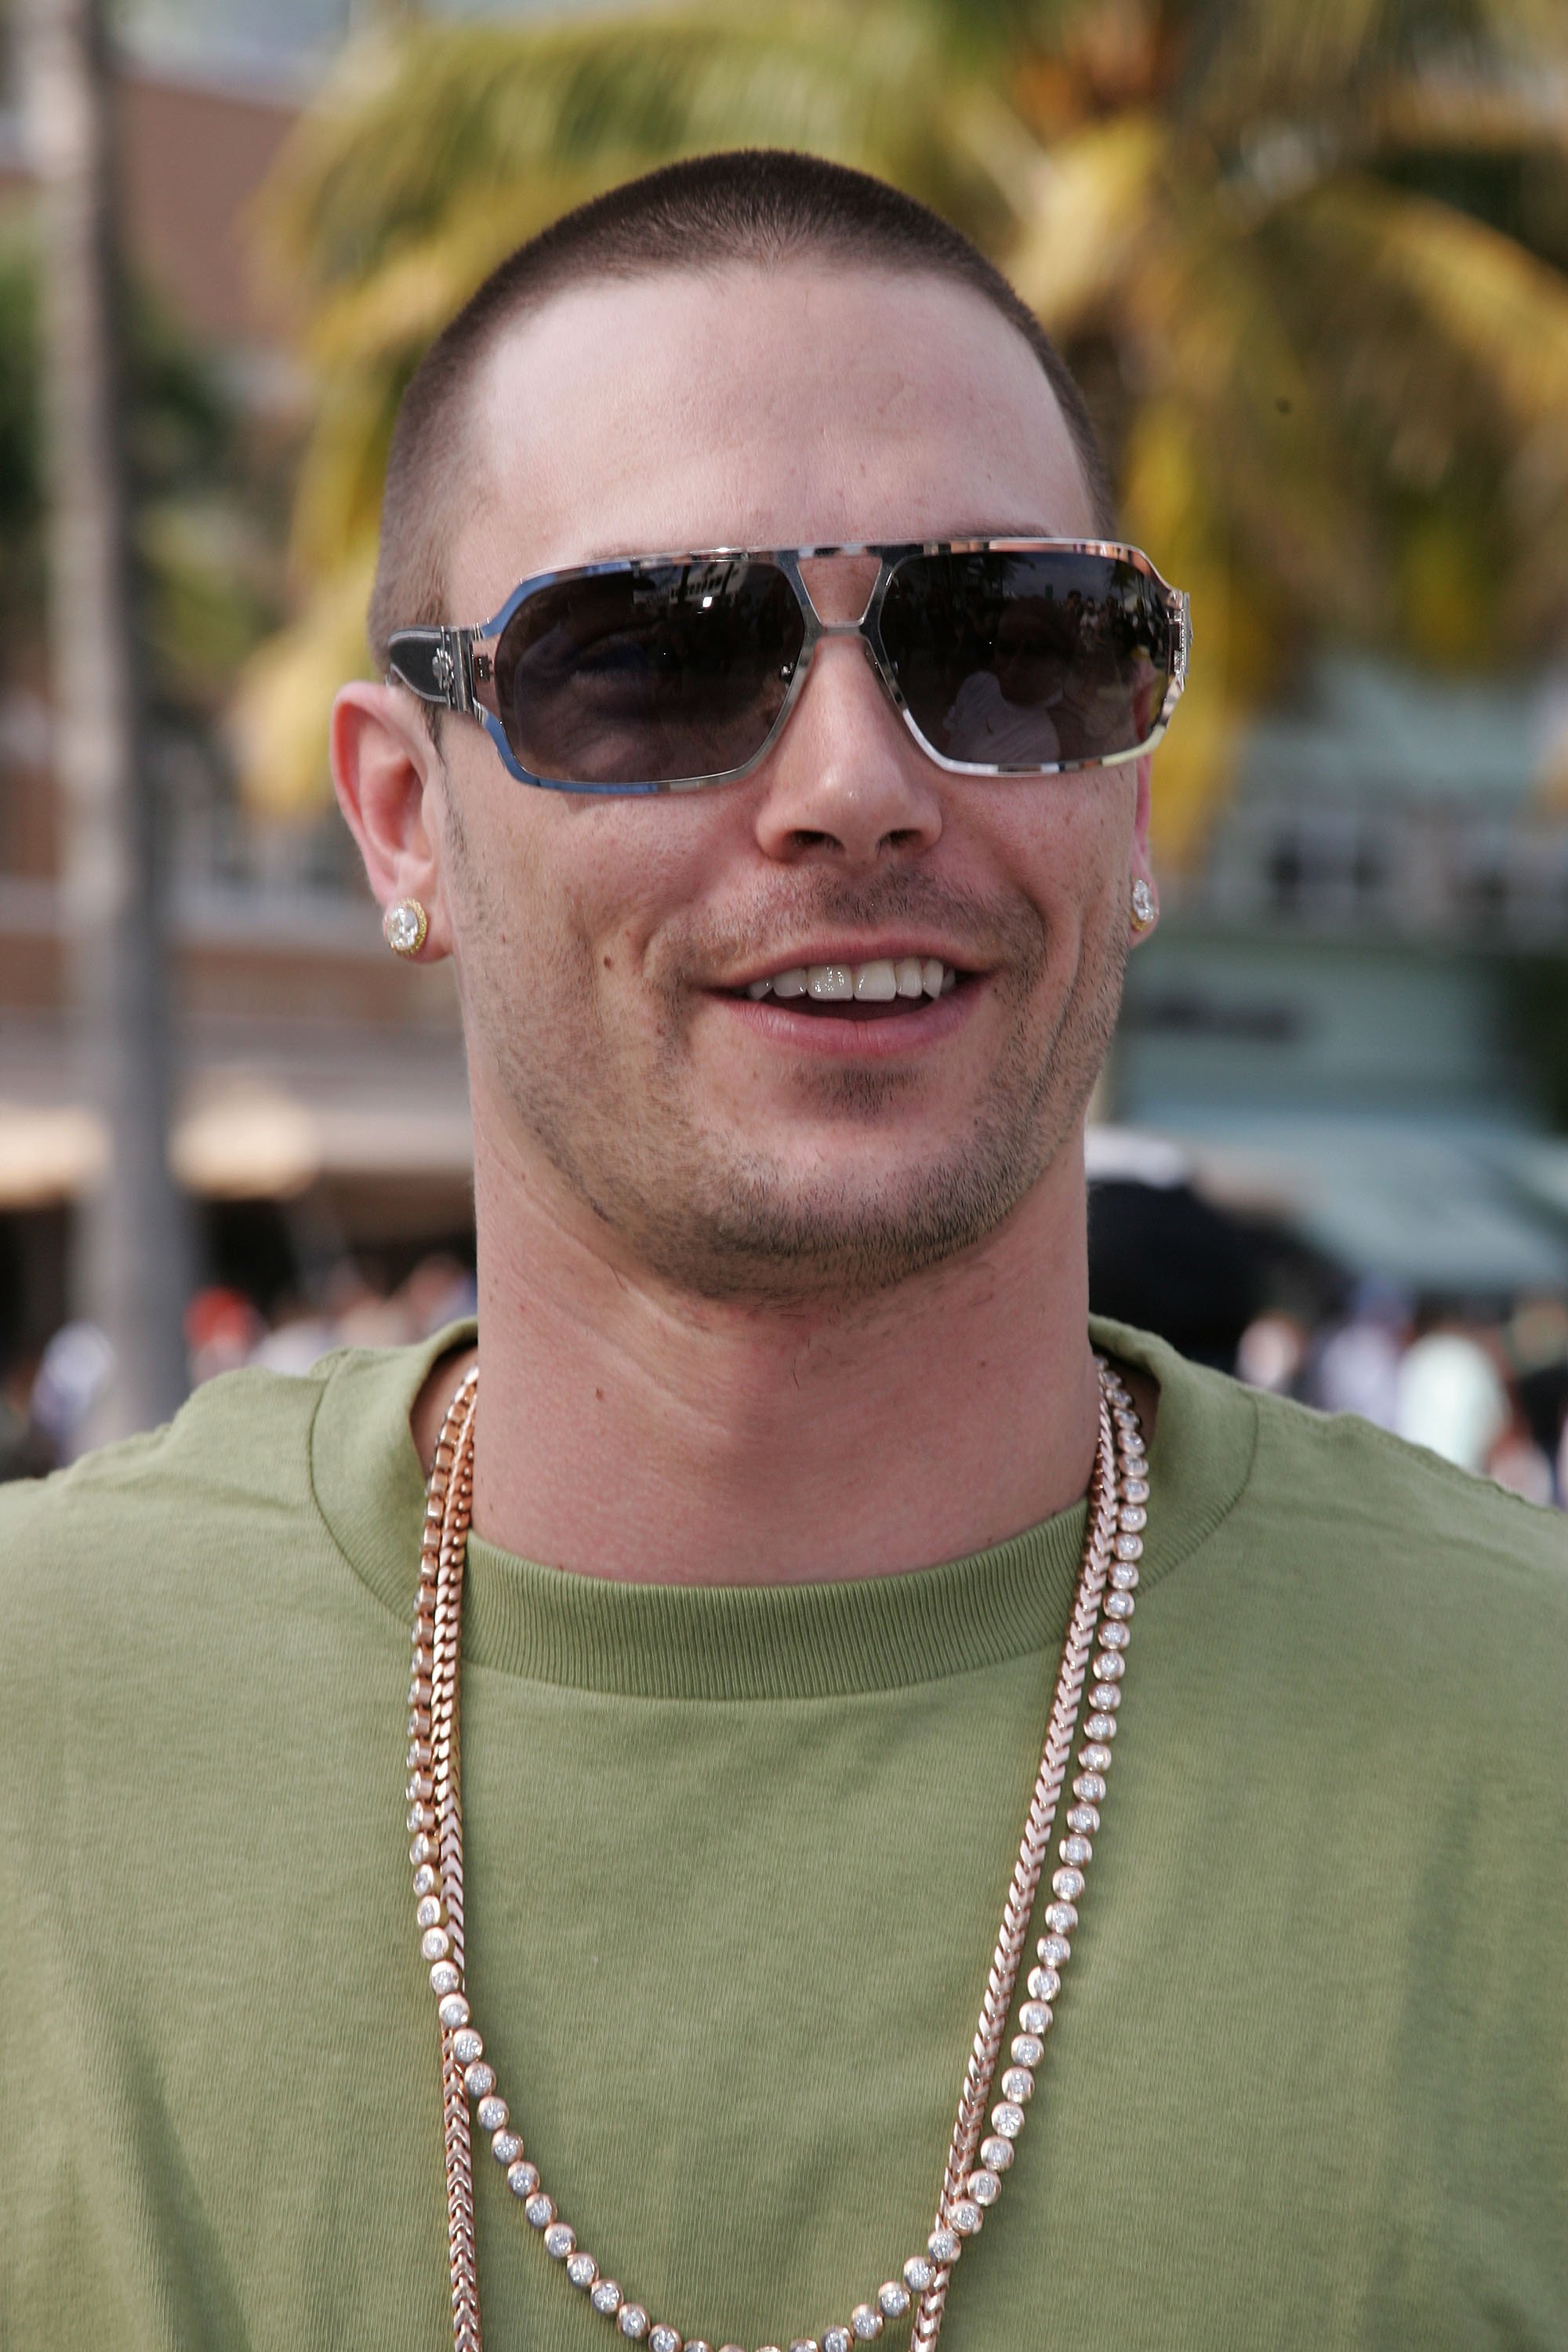 Kevin Federline during Celebrity Sightings In South Beach - February 2, 2007 at Streets of South Beach in Miami, Florida, United States. | Source: Getty Images